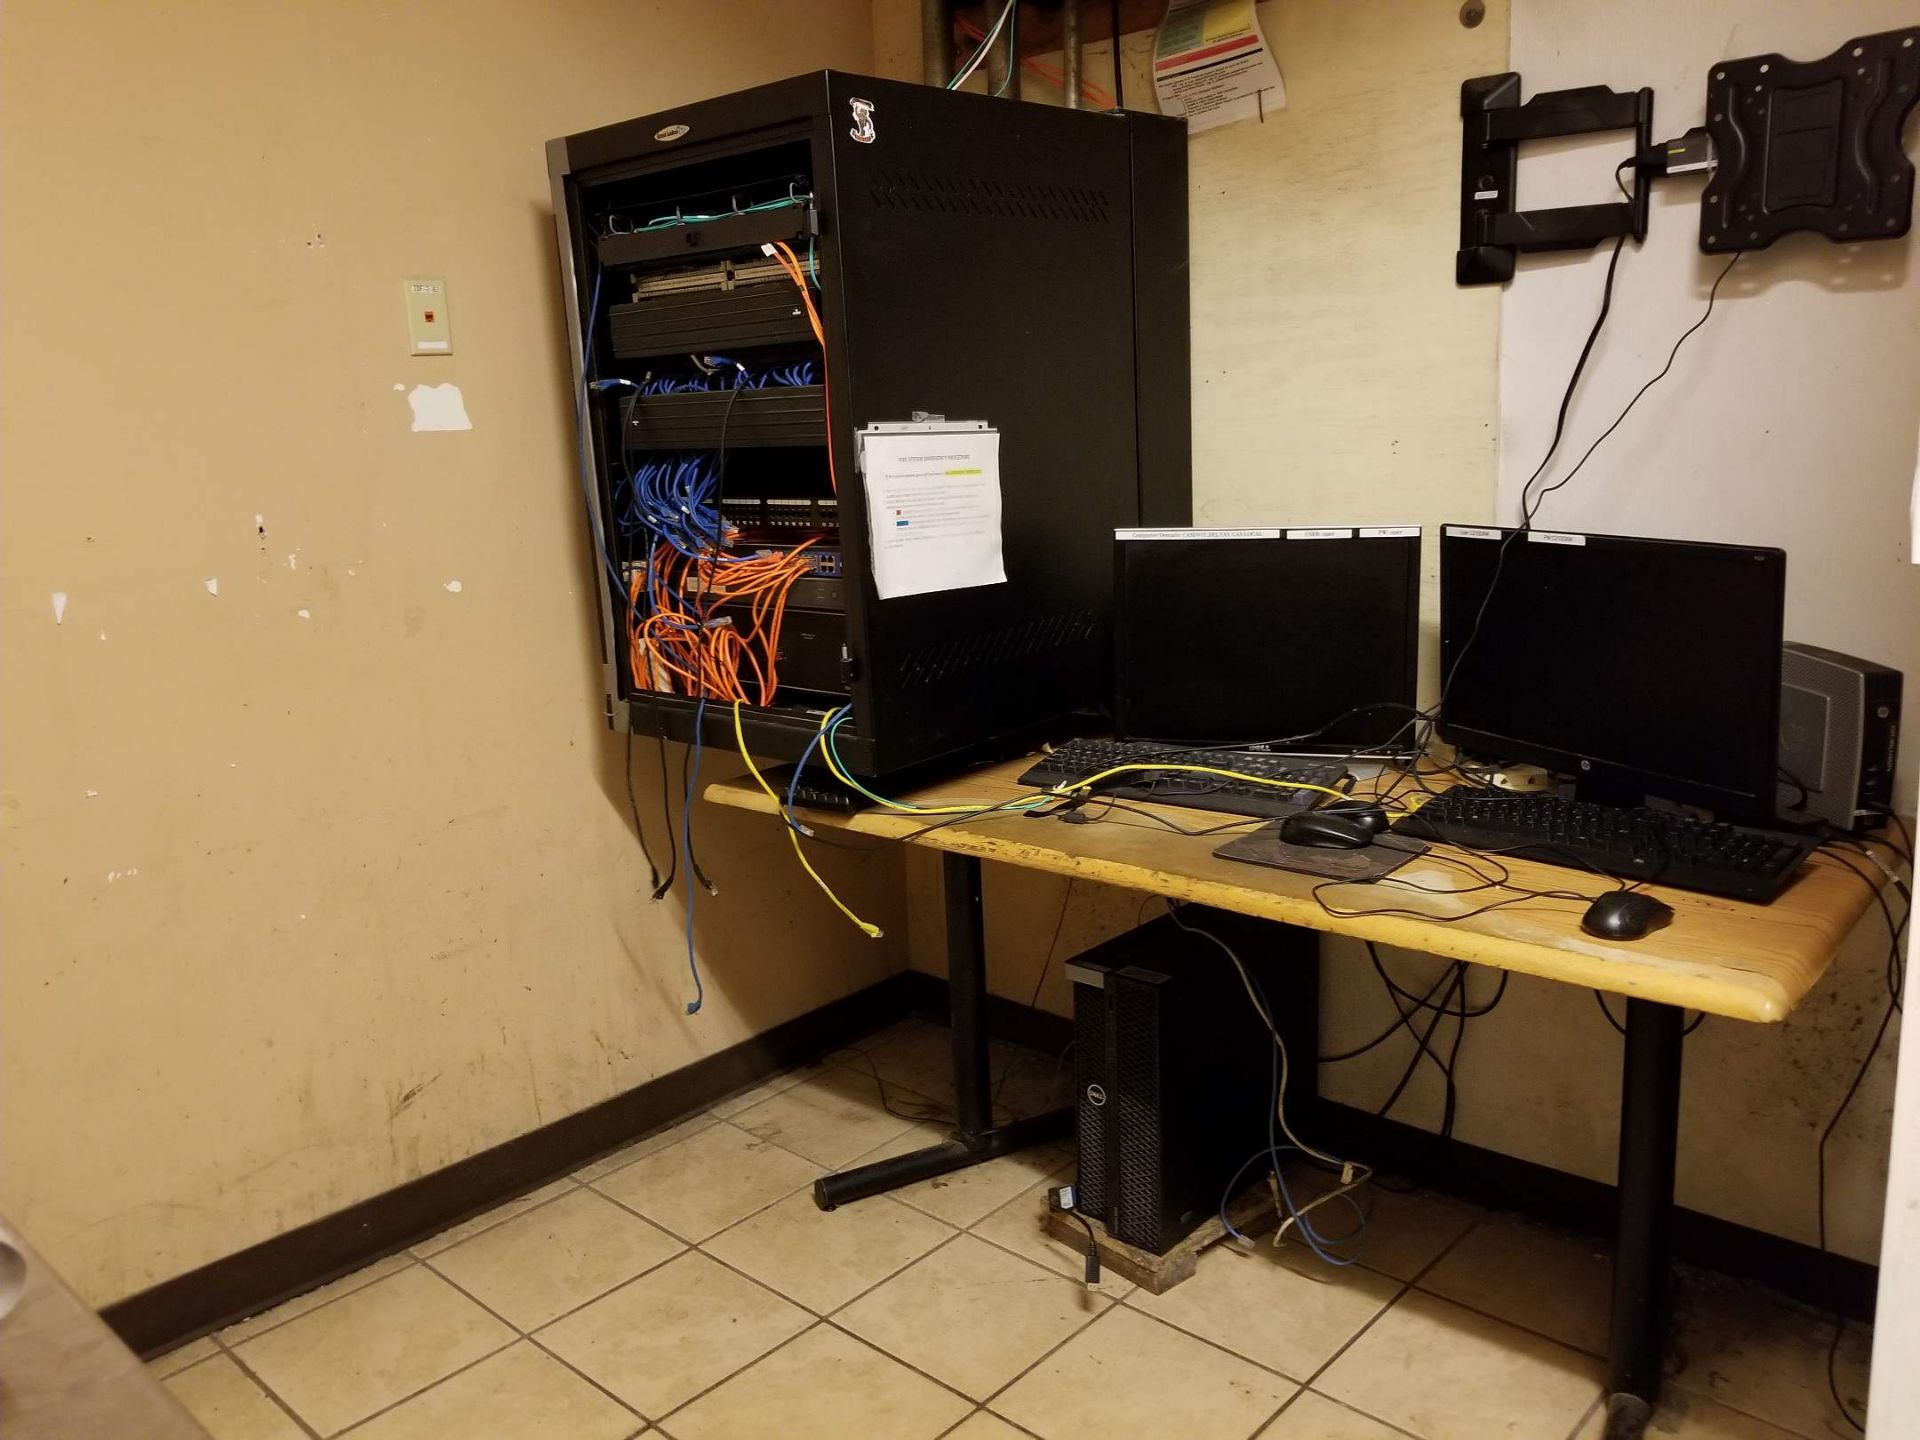 SERVER RACK W/ SWITCHES, ELECTRICAL COMMUNICATION SYSTEMS, MONITORS, COMPUTER, DESK, ETC. ( - Image 2 of 2